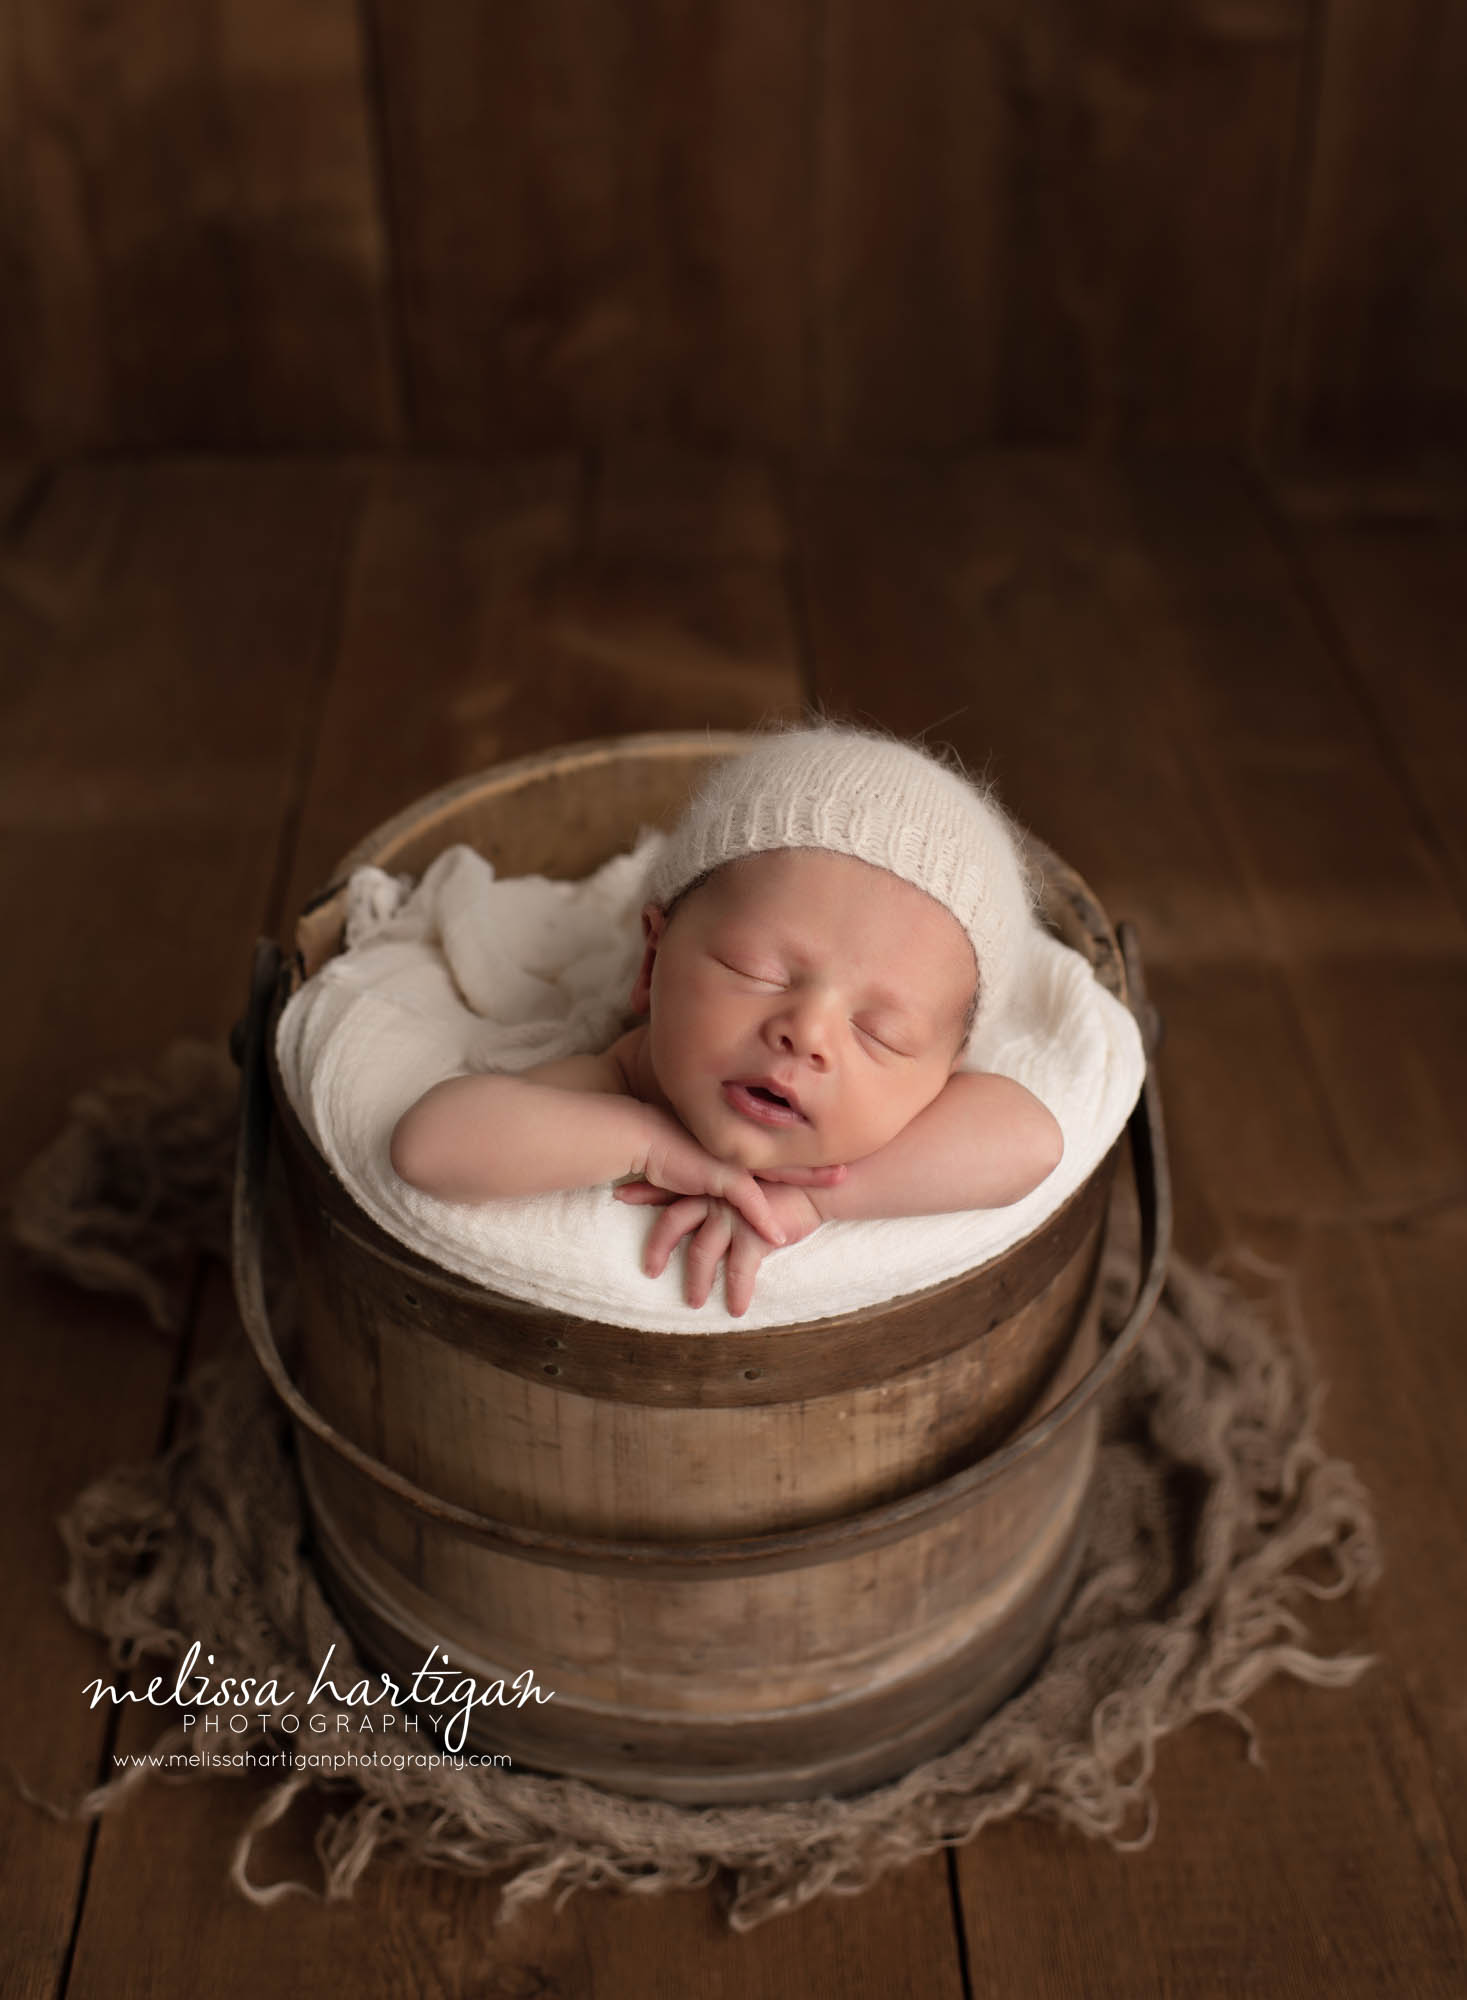 Baby posed in bucket with cream layer and knitted sleepy cap